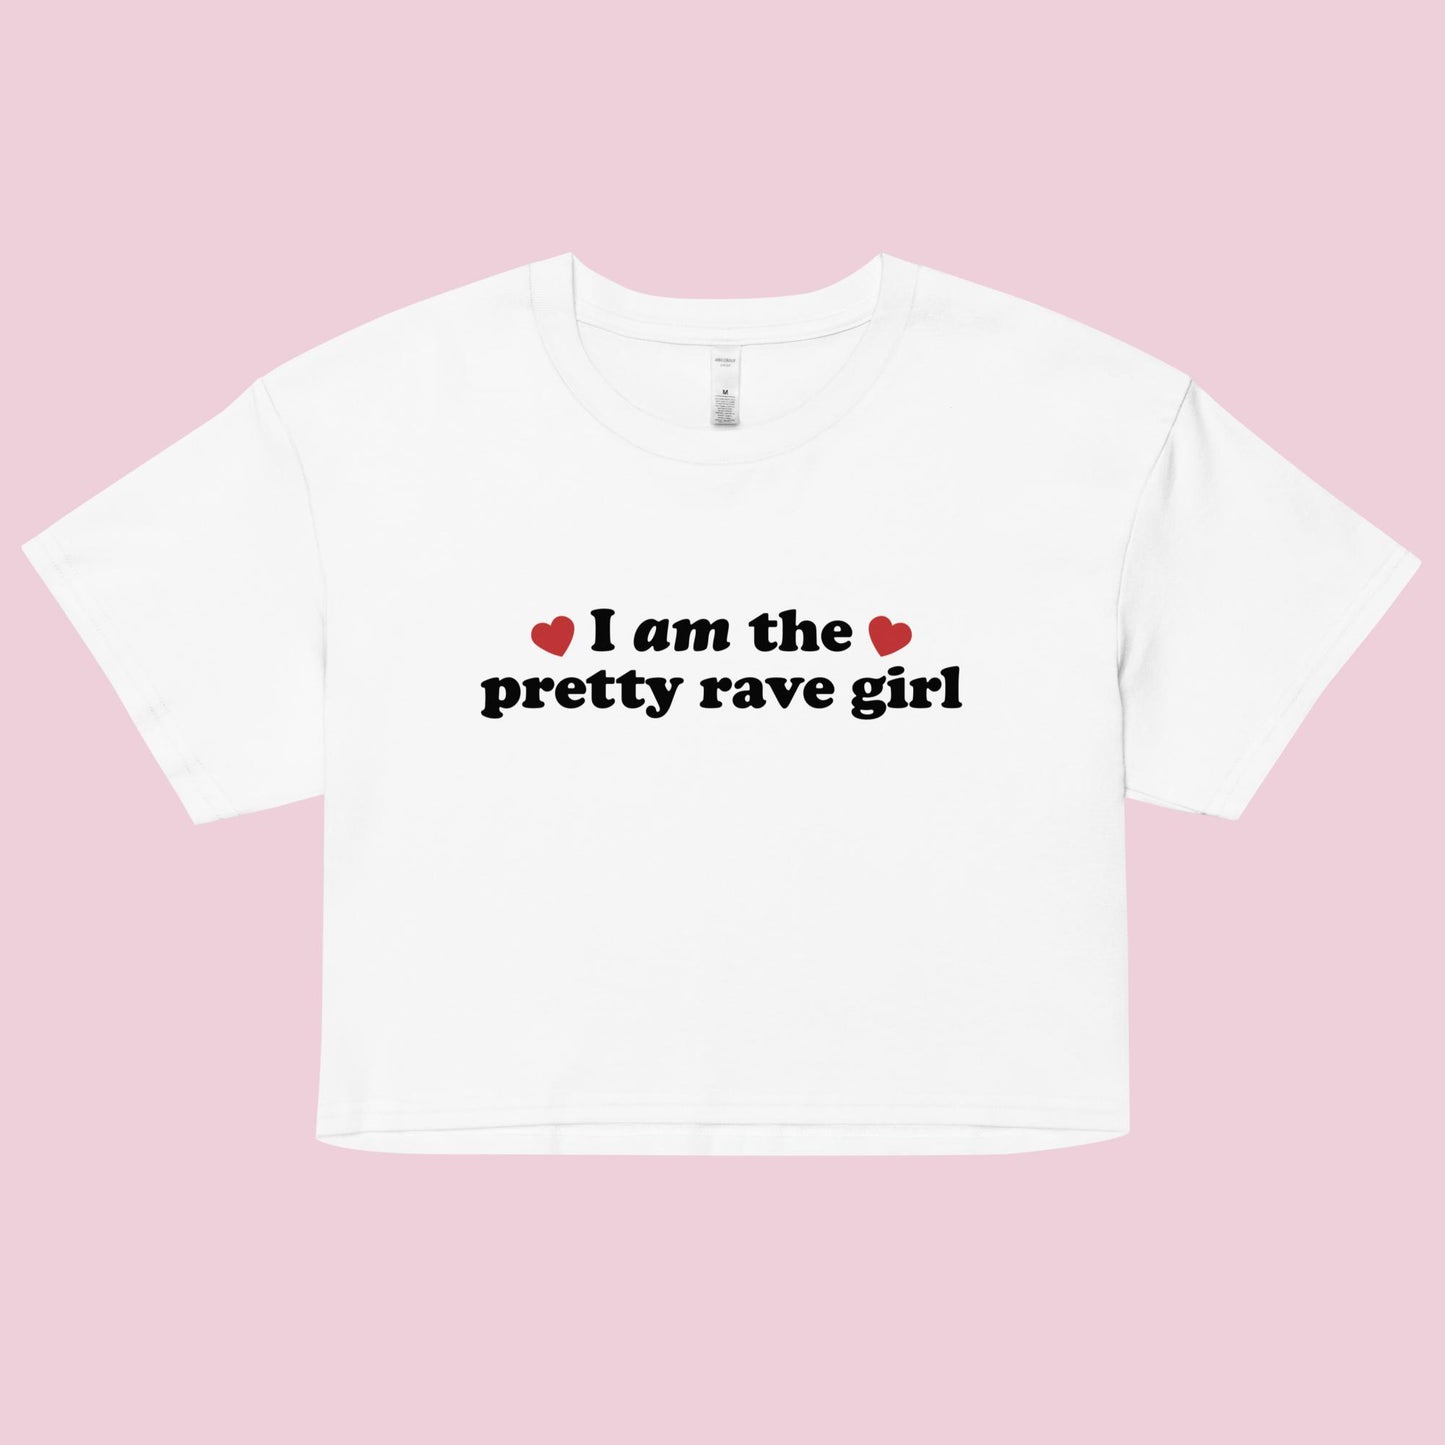 I Am the Pretty Rave Girl Women’s Boxy Crop Top